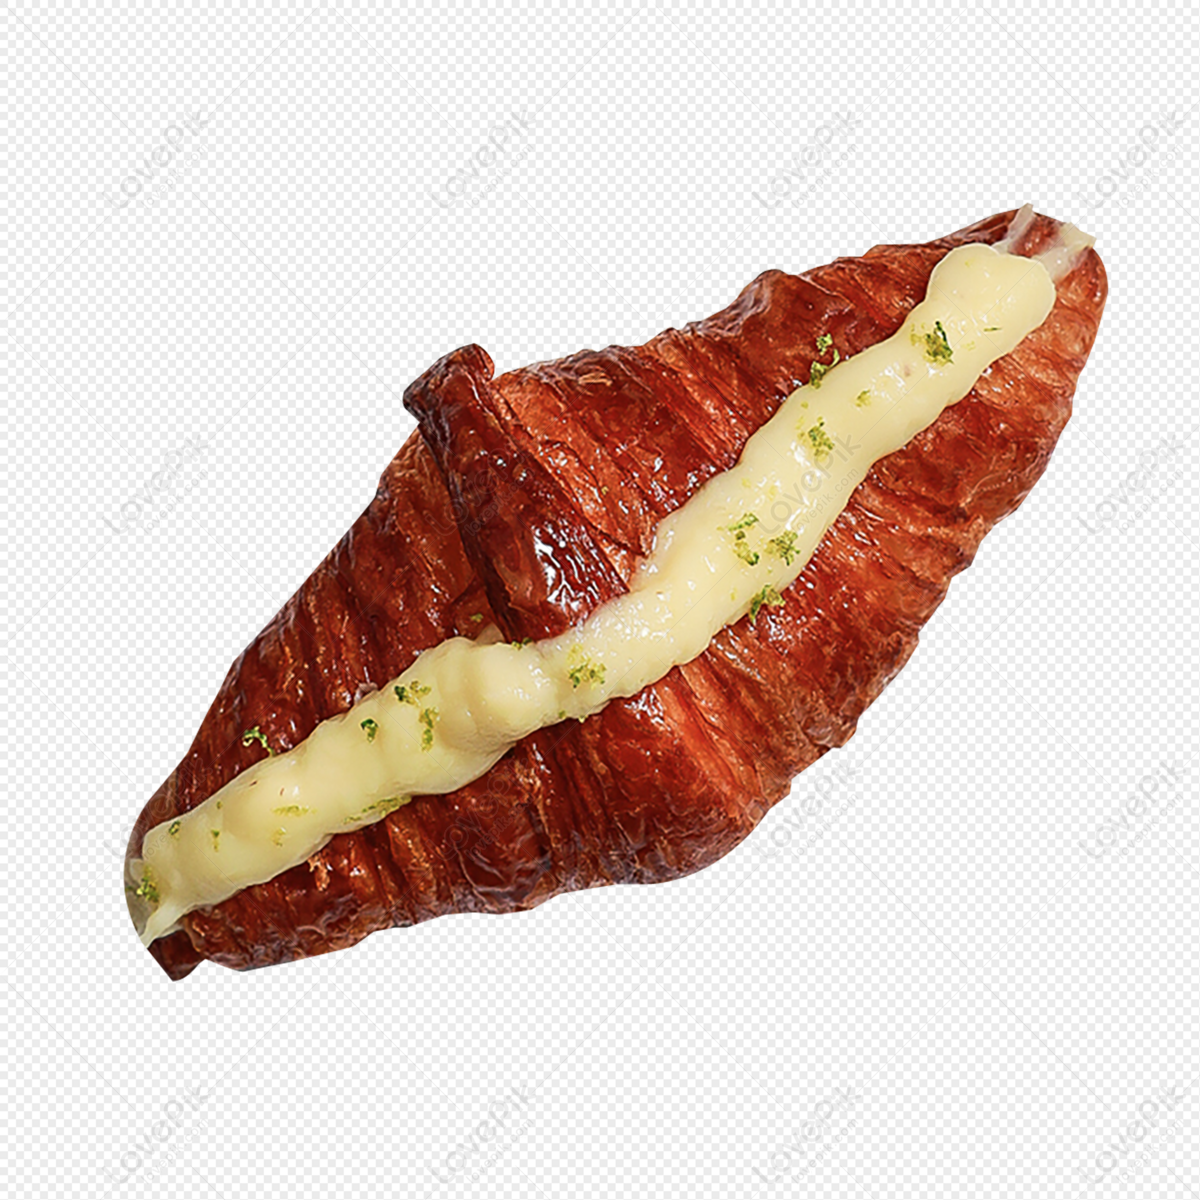 Croissant PNG Transparent And Clipart Image For Free Download - Lovepik ...